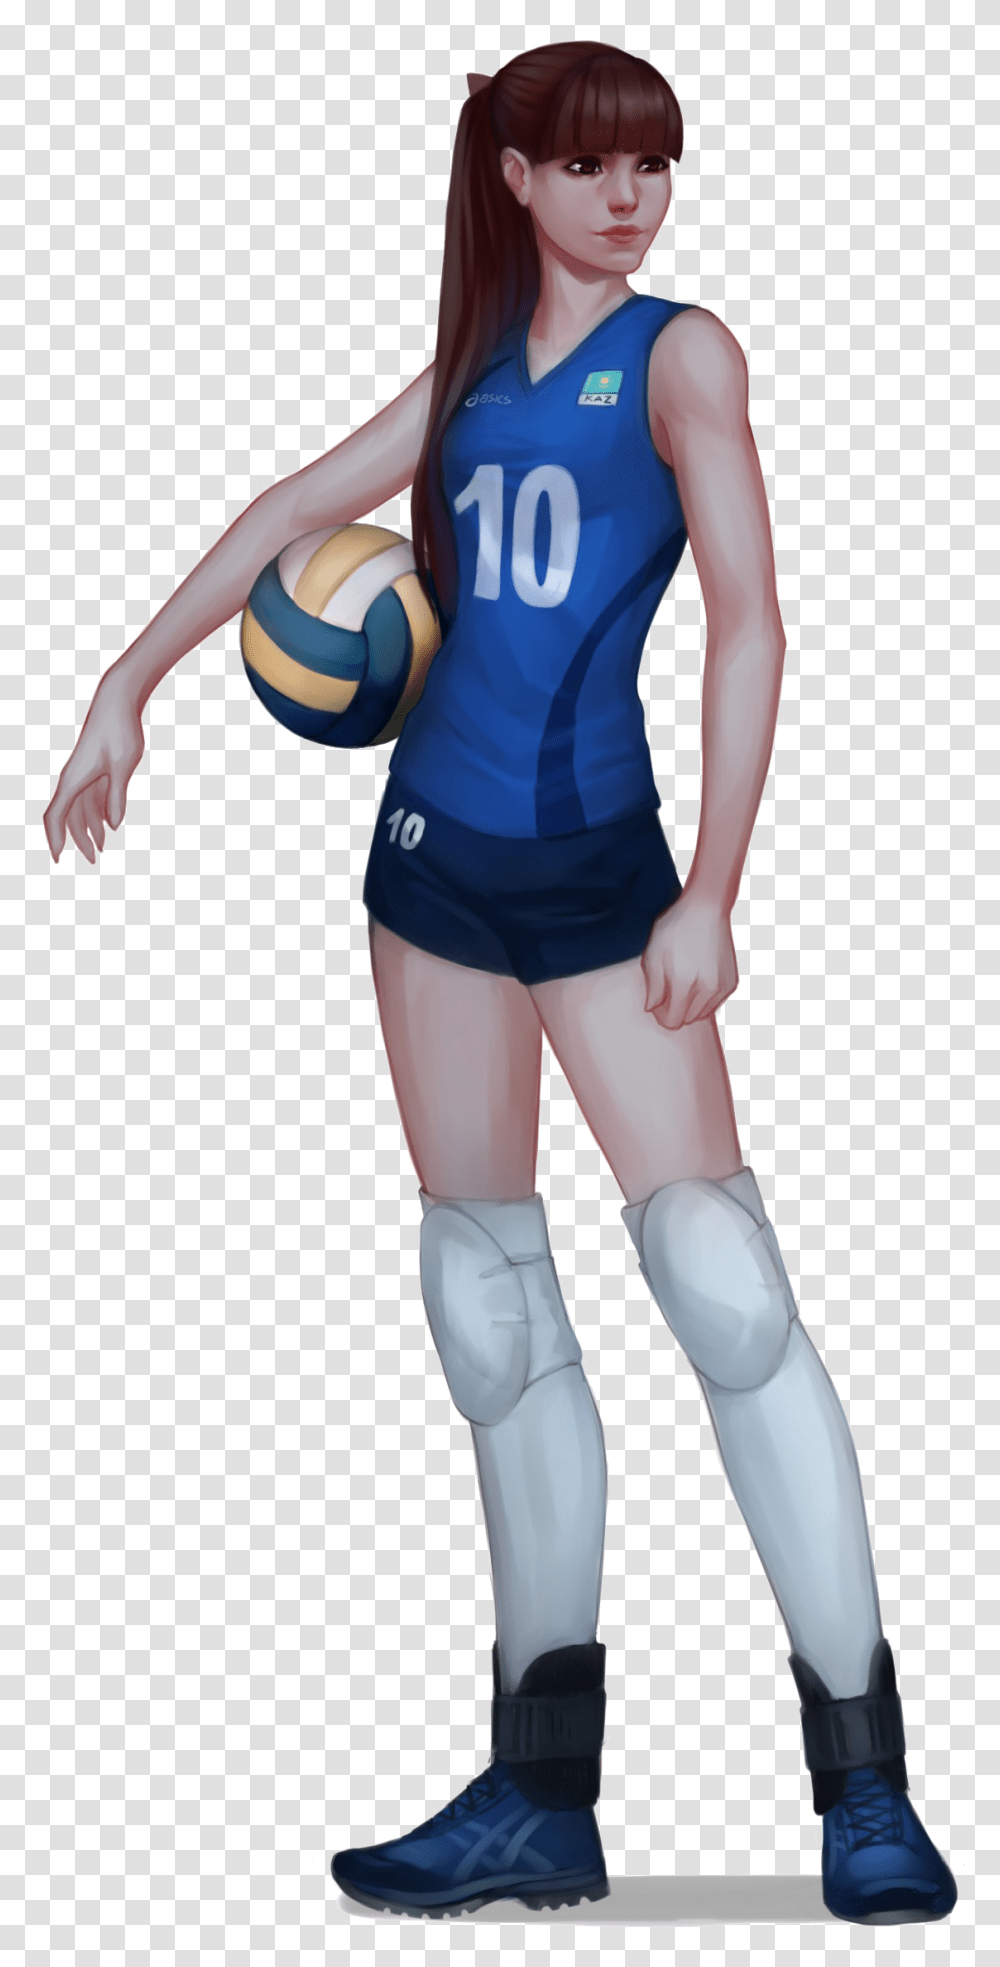 Volleyball Player Download Image Anime Girl Playing Volleyball, Clothing, Person, People, Costume Transparent Png